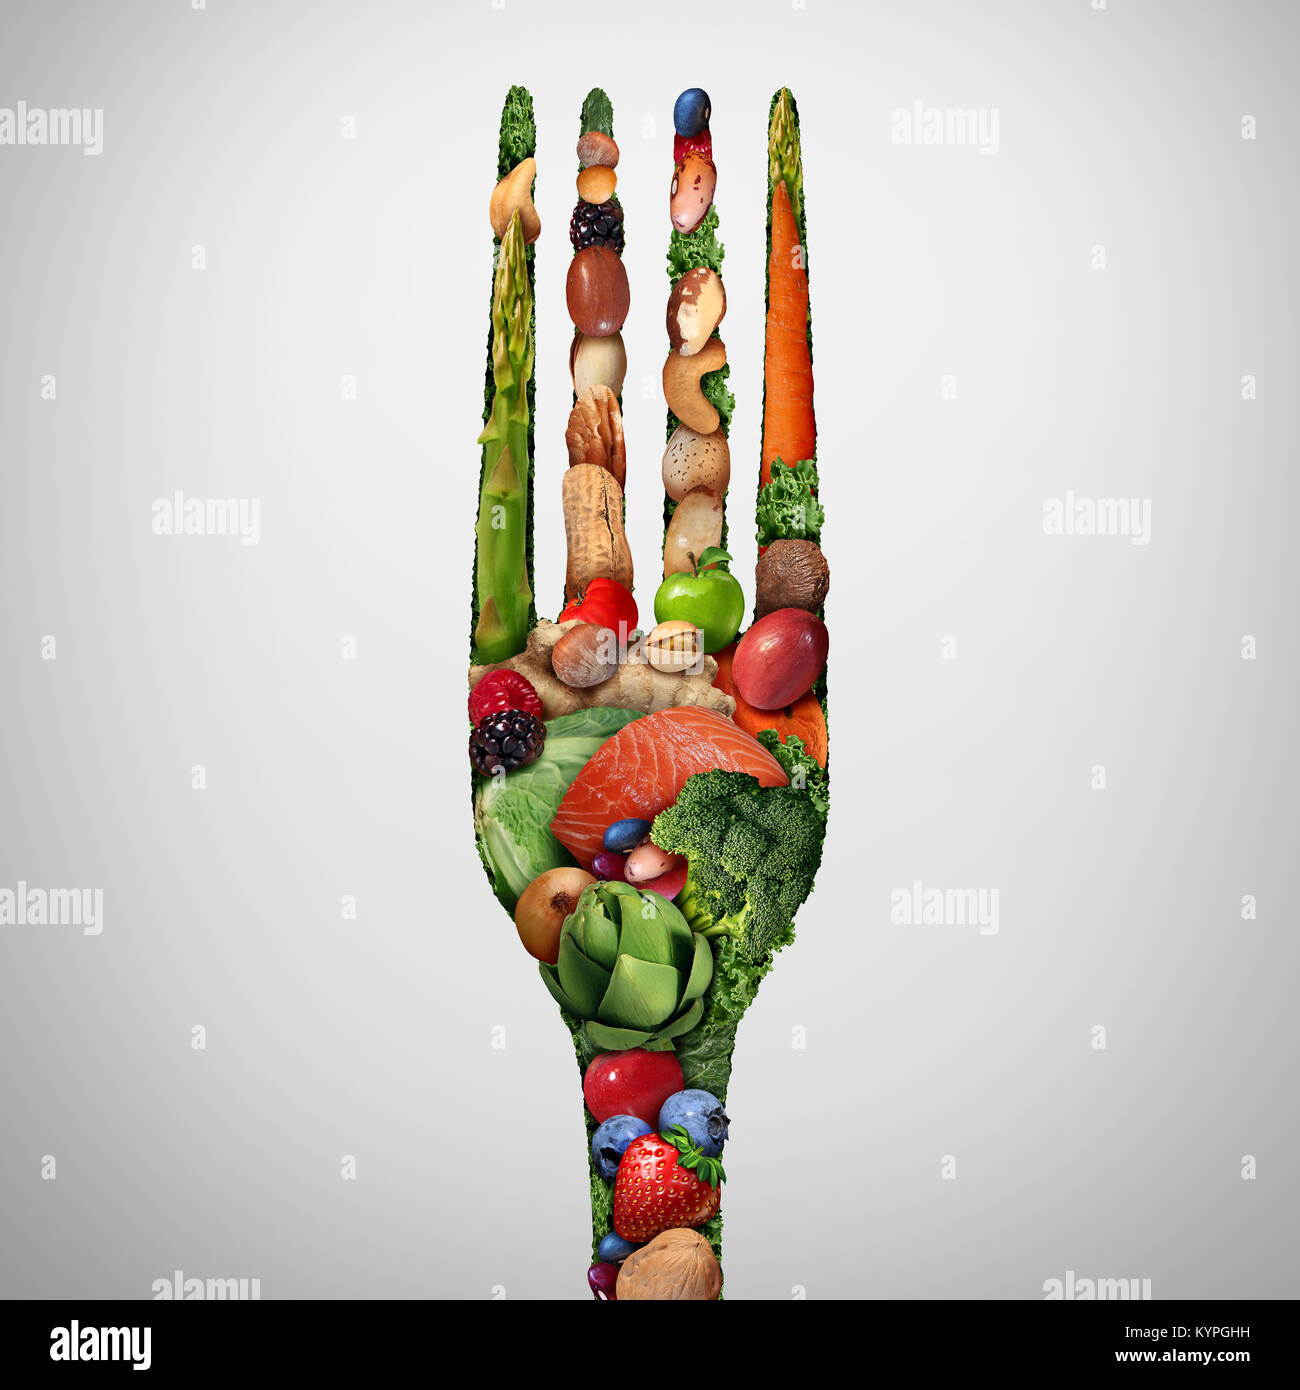 Eat healthy food symbol as nuts beans vegetables fruit fish shaped like a dinner fork as a health nutrition and fresh market produce. Stock Photo